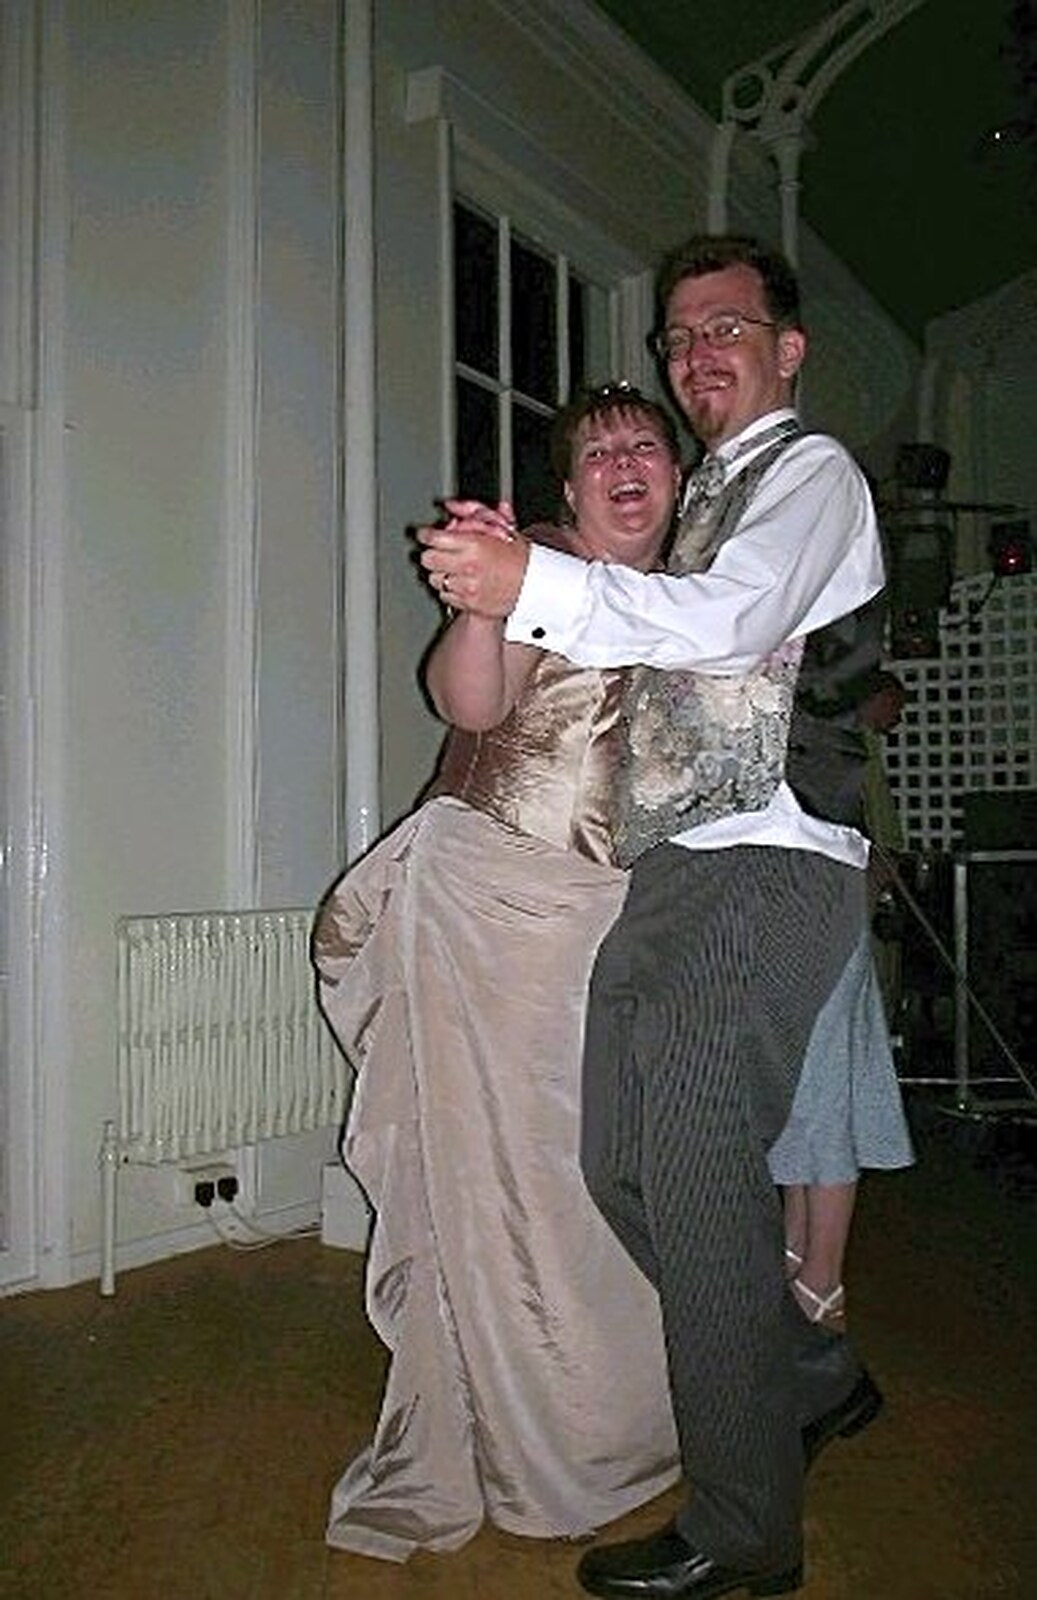 More dancing action from Phil and Lisa's Wedding, Woolverston Hall, Ipswich, Suffolk - 1st July 2001